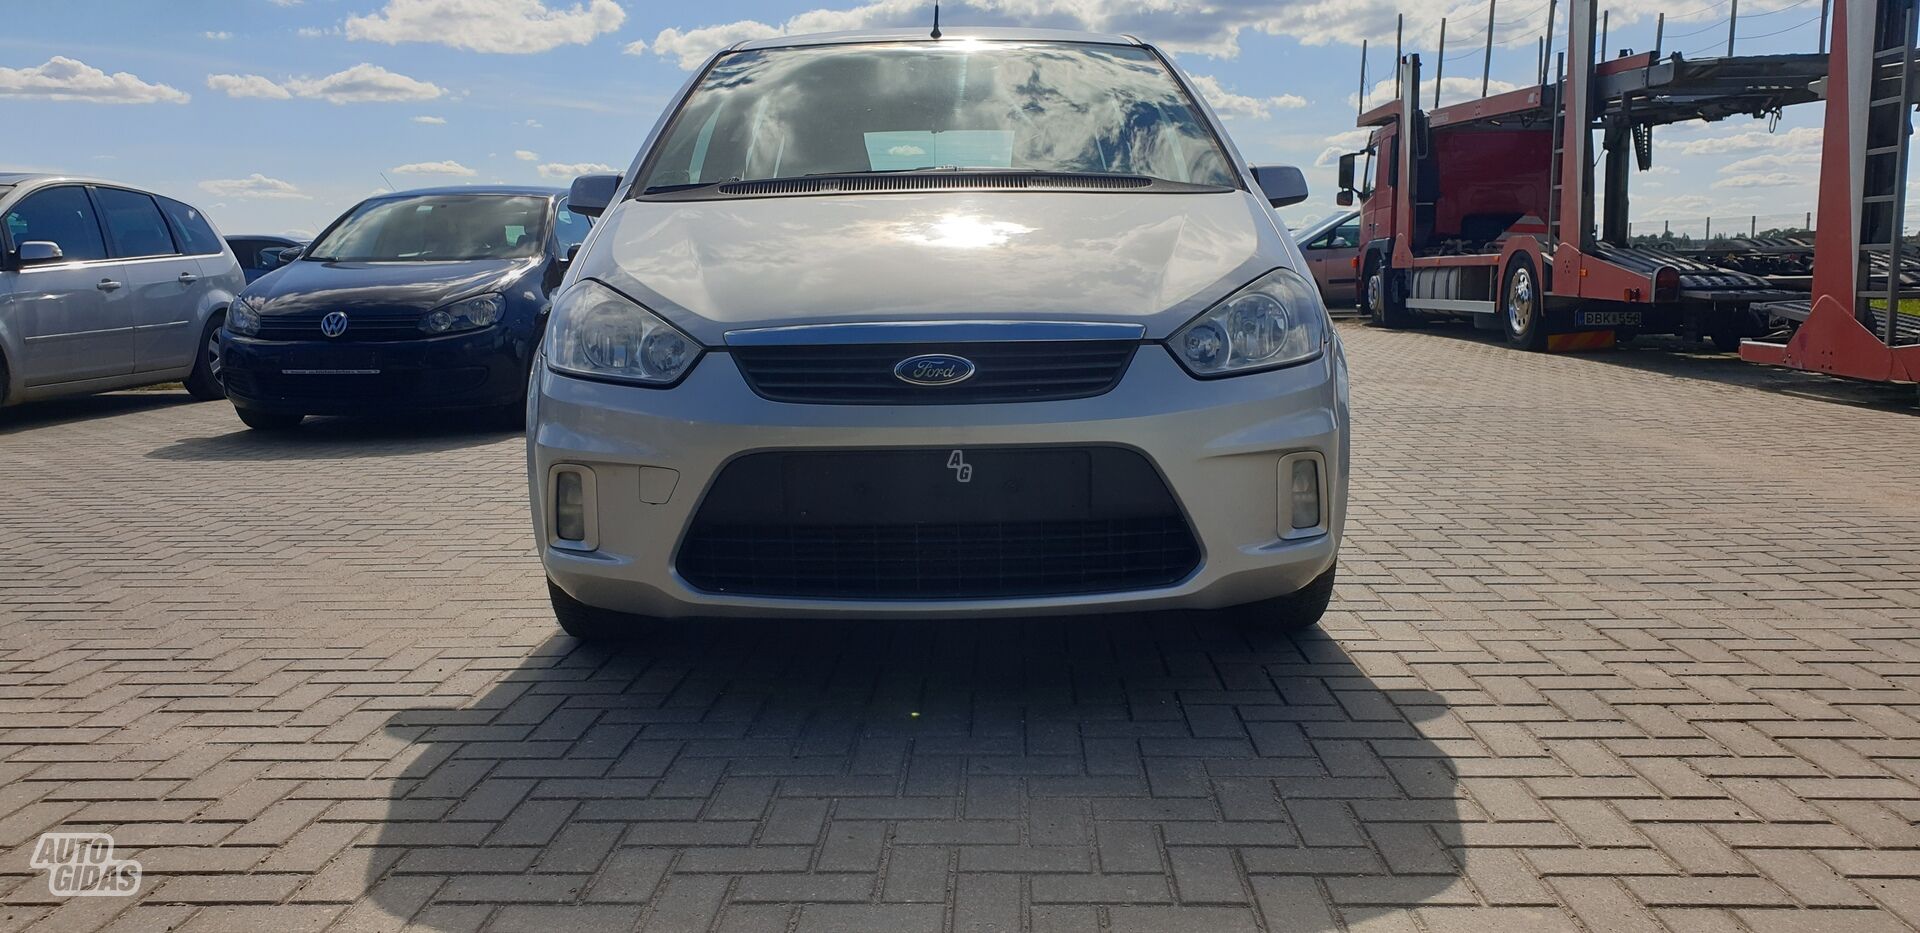 Ford C-MAX TDCI 2008 г